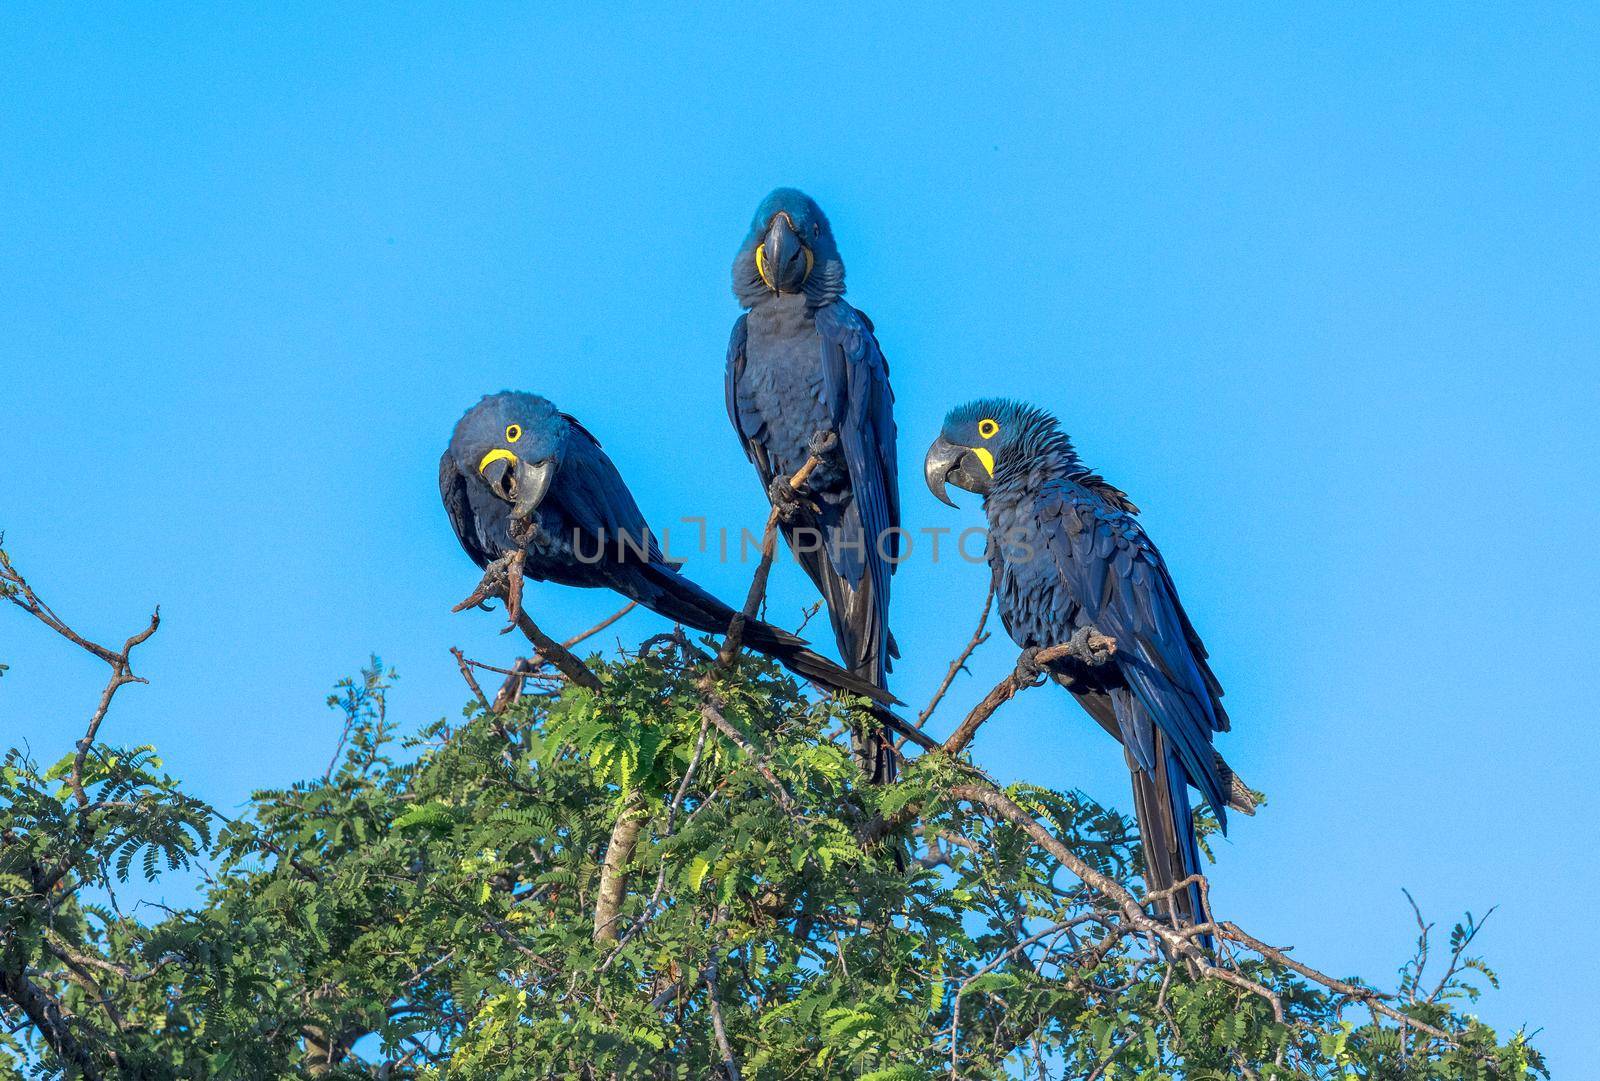 Hyacinth Macaws, Anodorhynchus hyacinthinus, are found in a limited range of South America, mainly in the Pantanal of Brazil and Bolivia. Their population is threatened by habitat loss, the pet trade and mechanized agriculture.